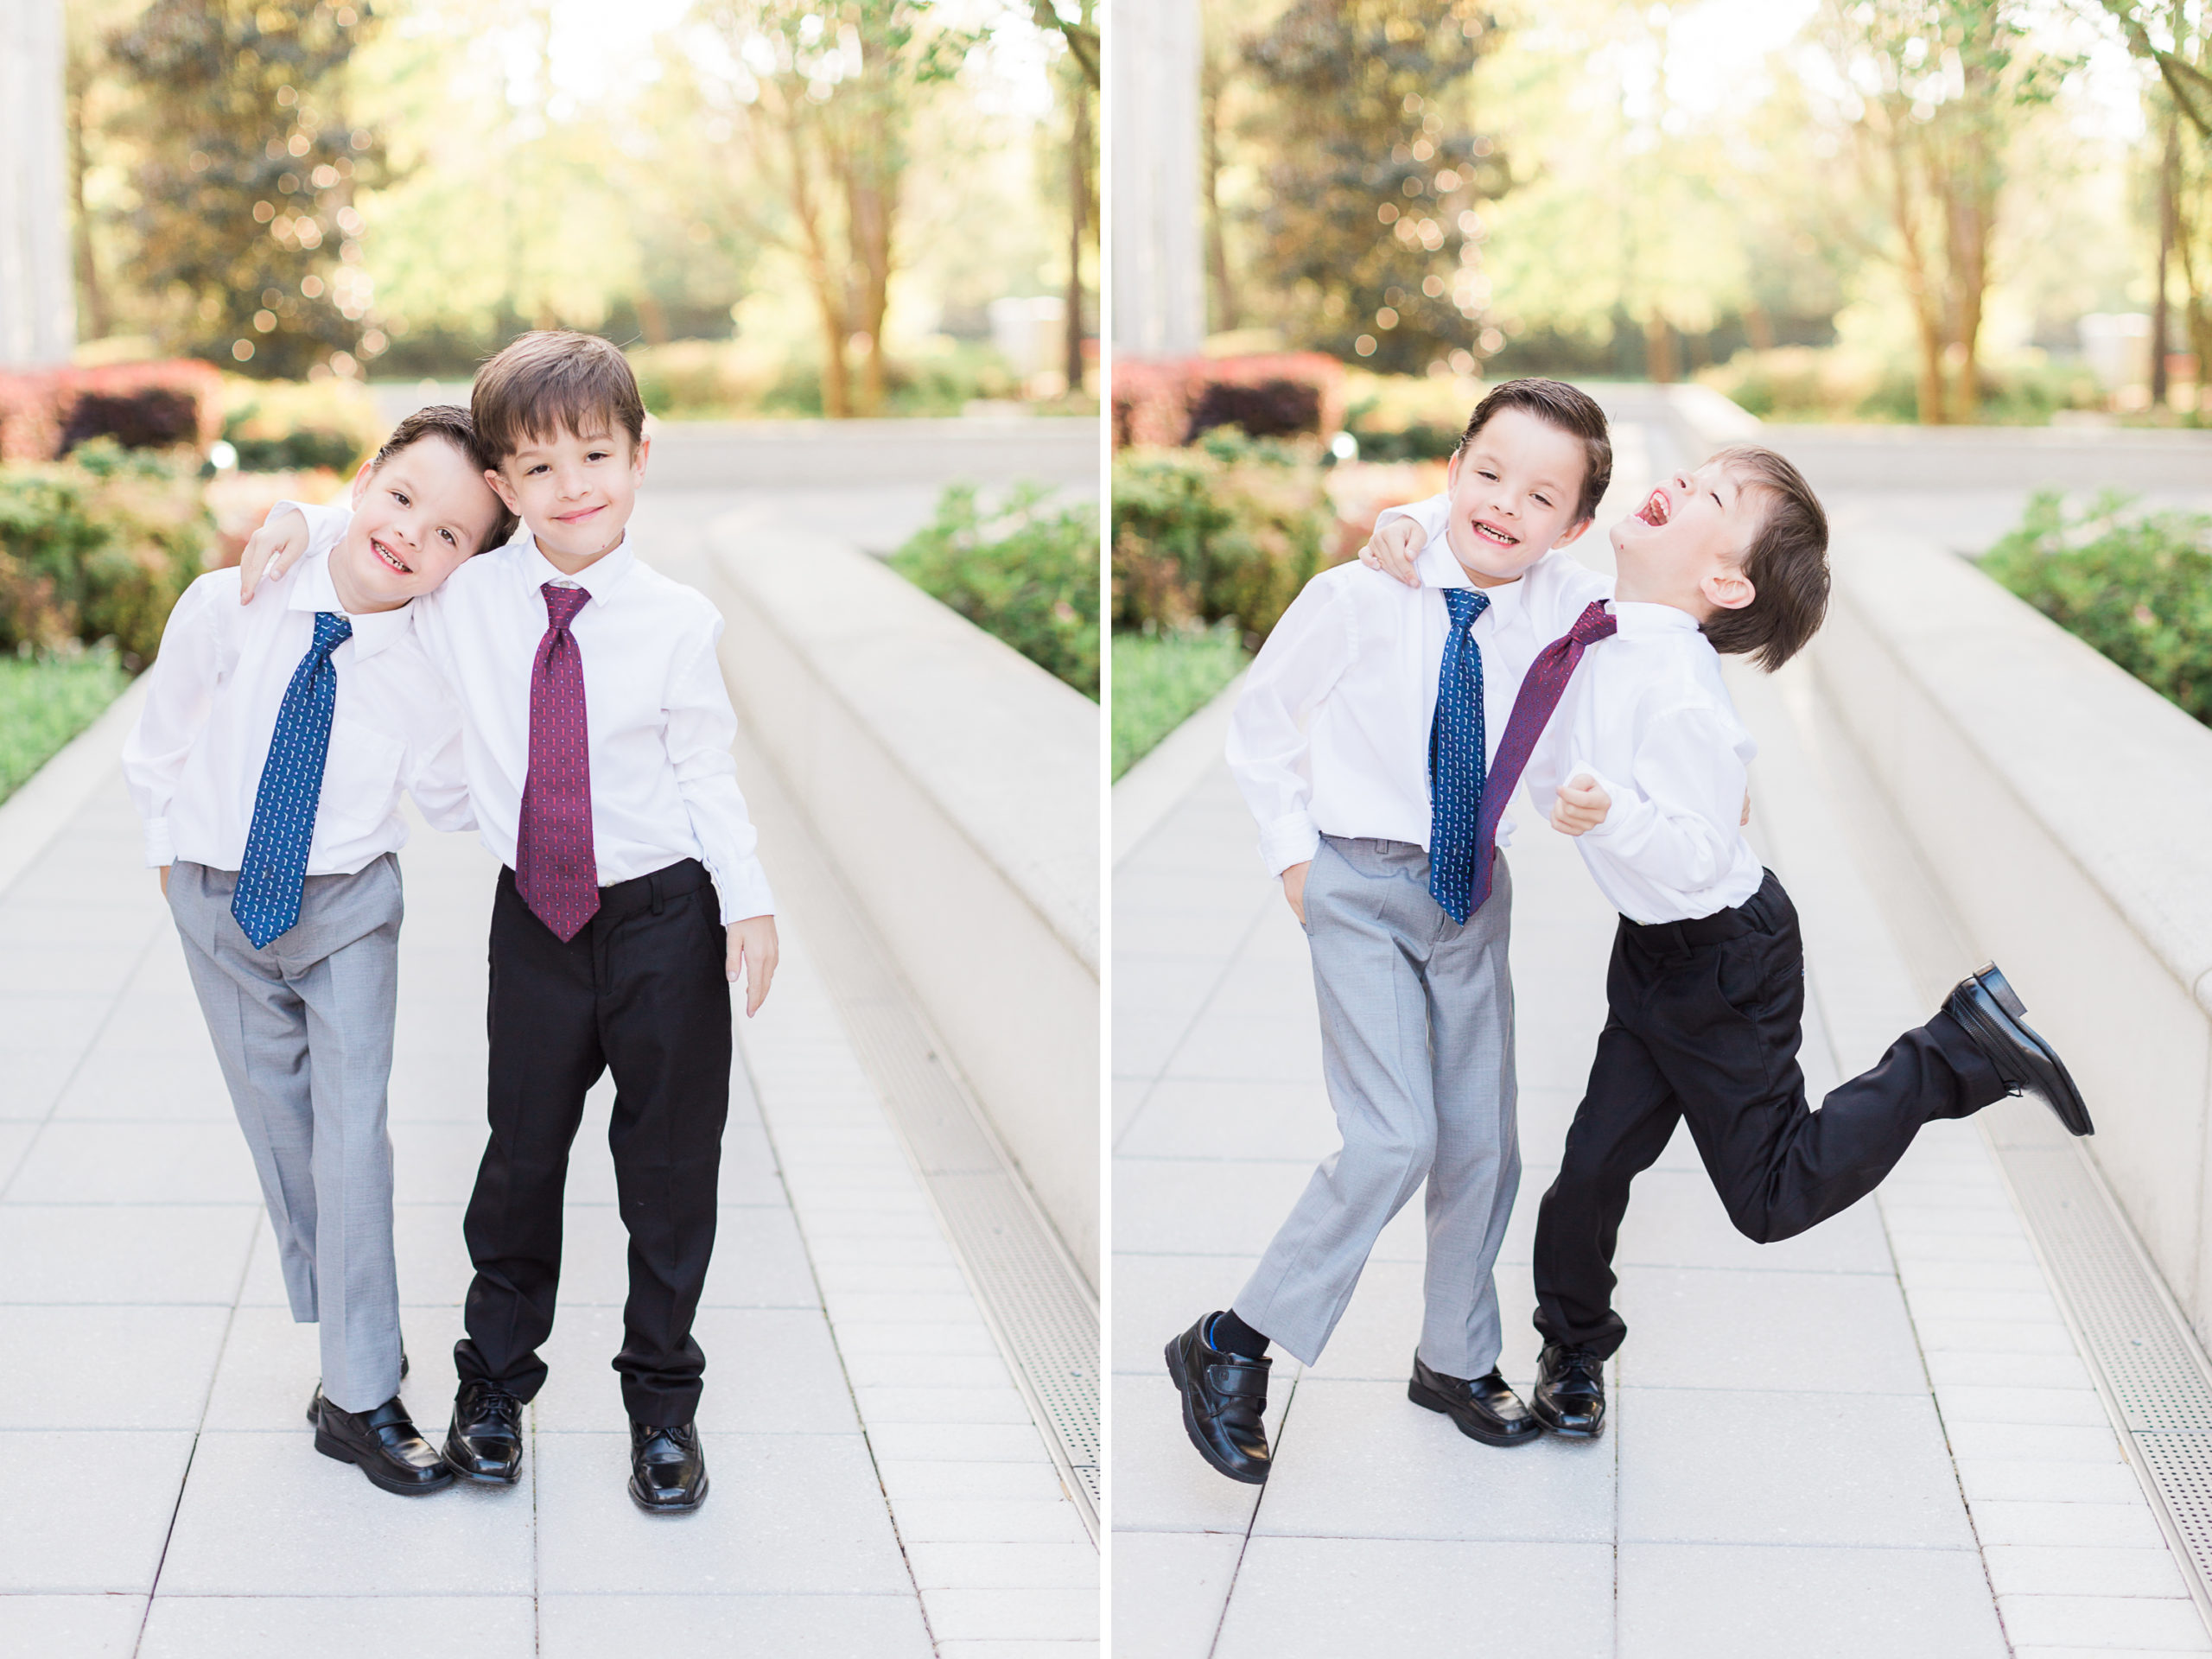 A couple of brothers act silly with each other in a suit and tie